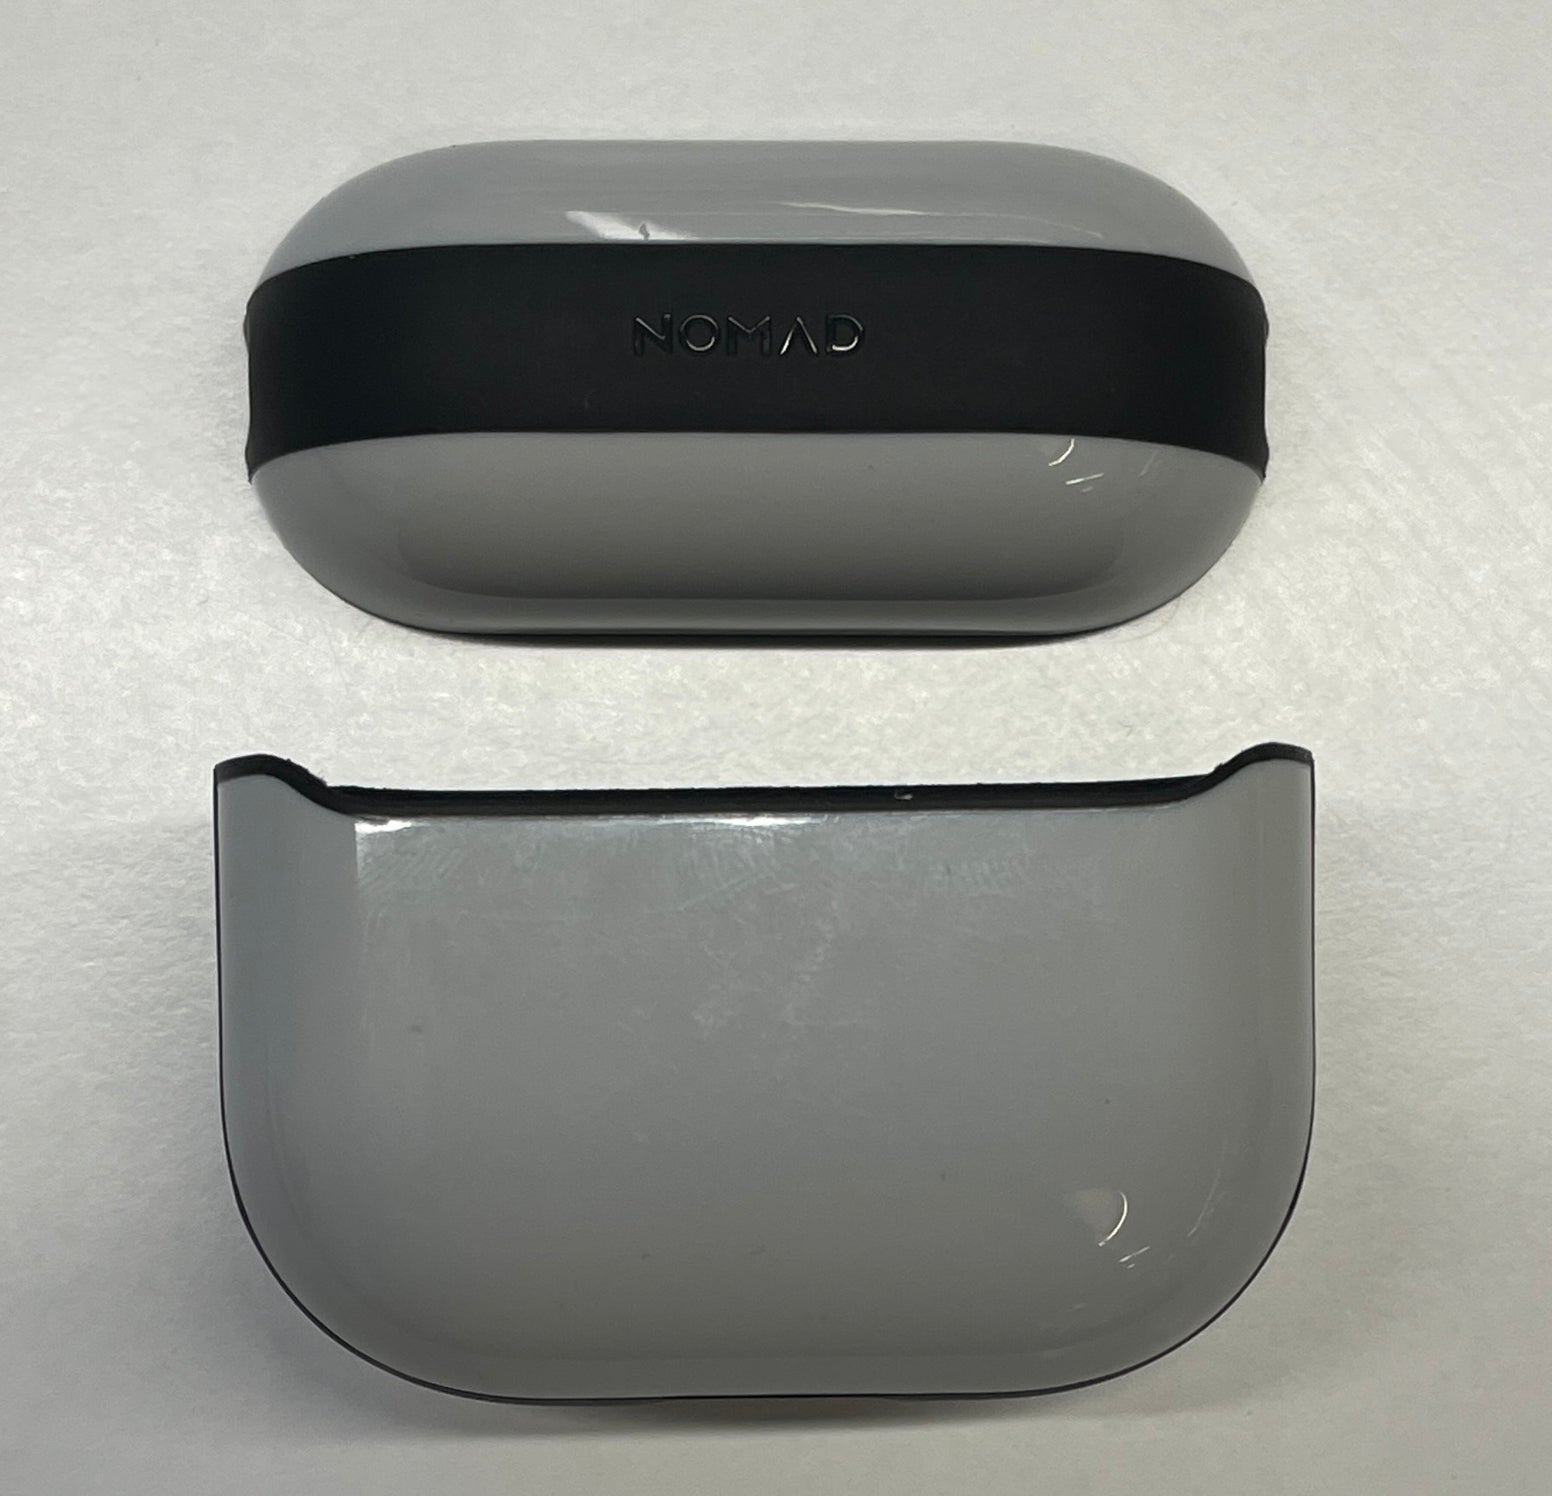 Nomad Sport Case for AirPods 3rd Generation - Lunar Grey - Open Box